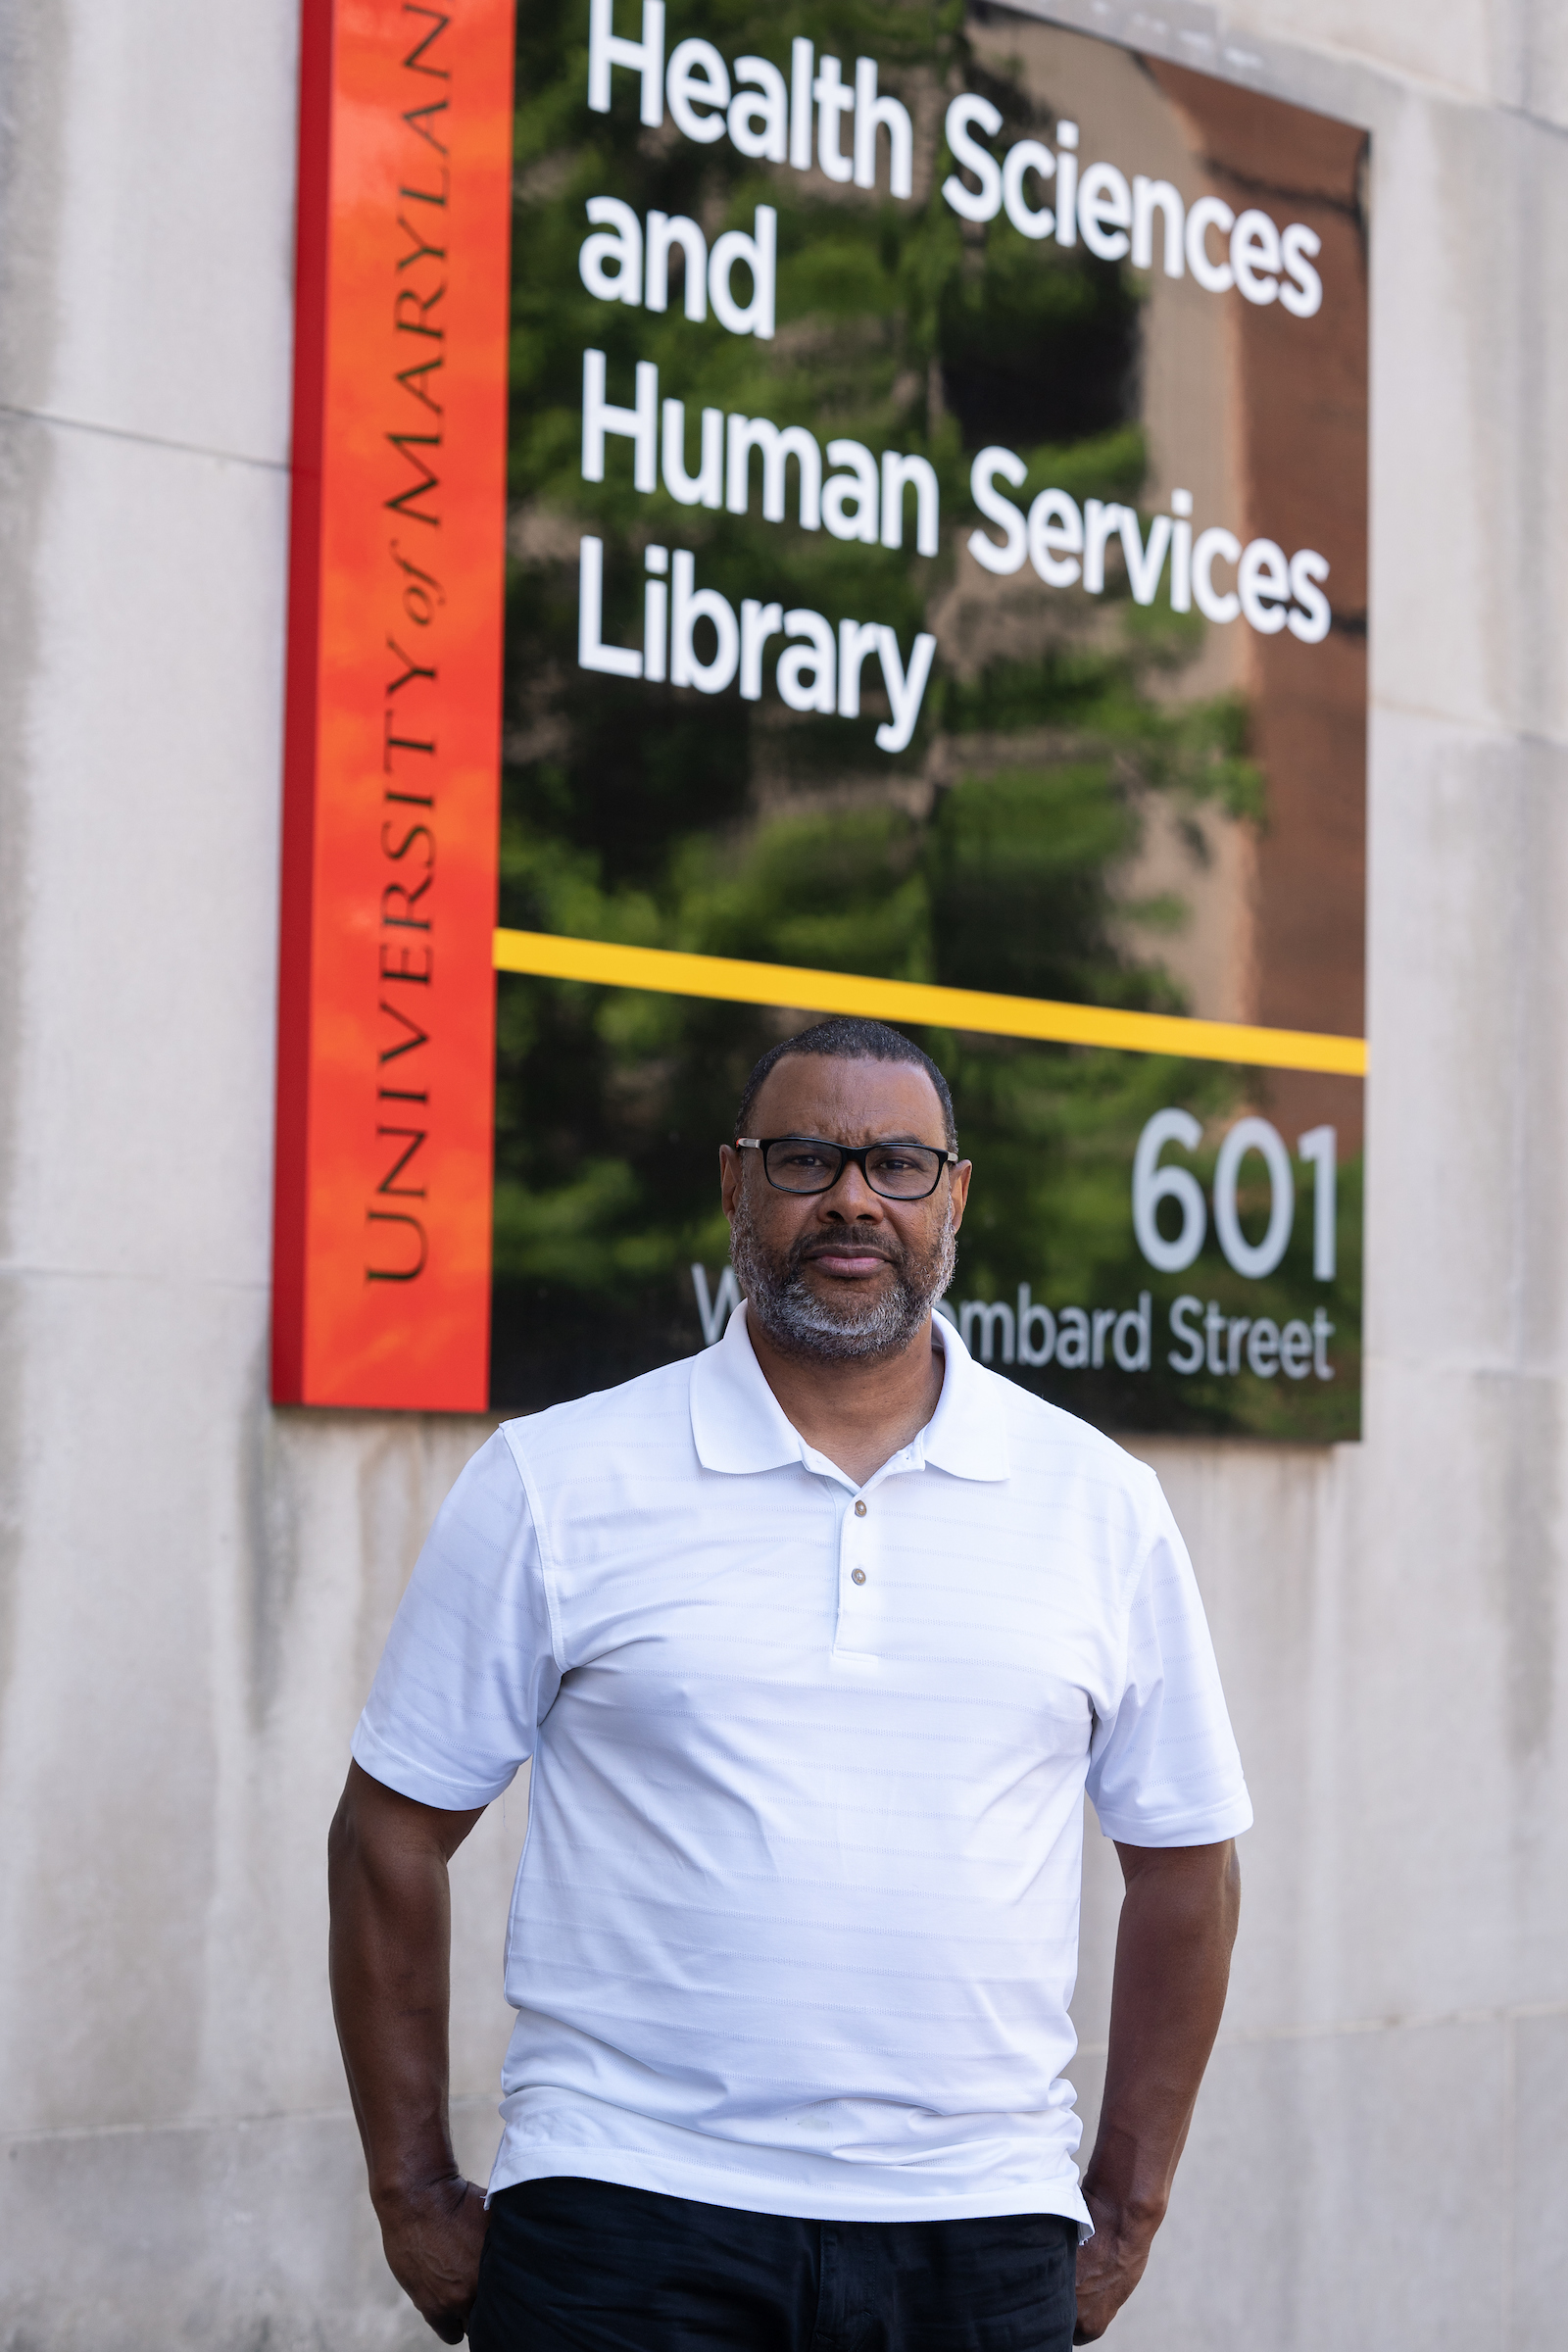 Patrick Williams standing outside the Health Sciences and Human Services Library